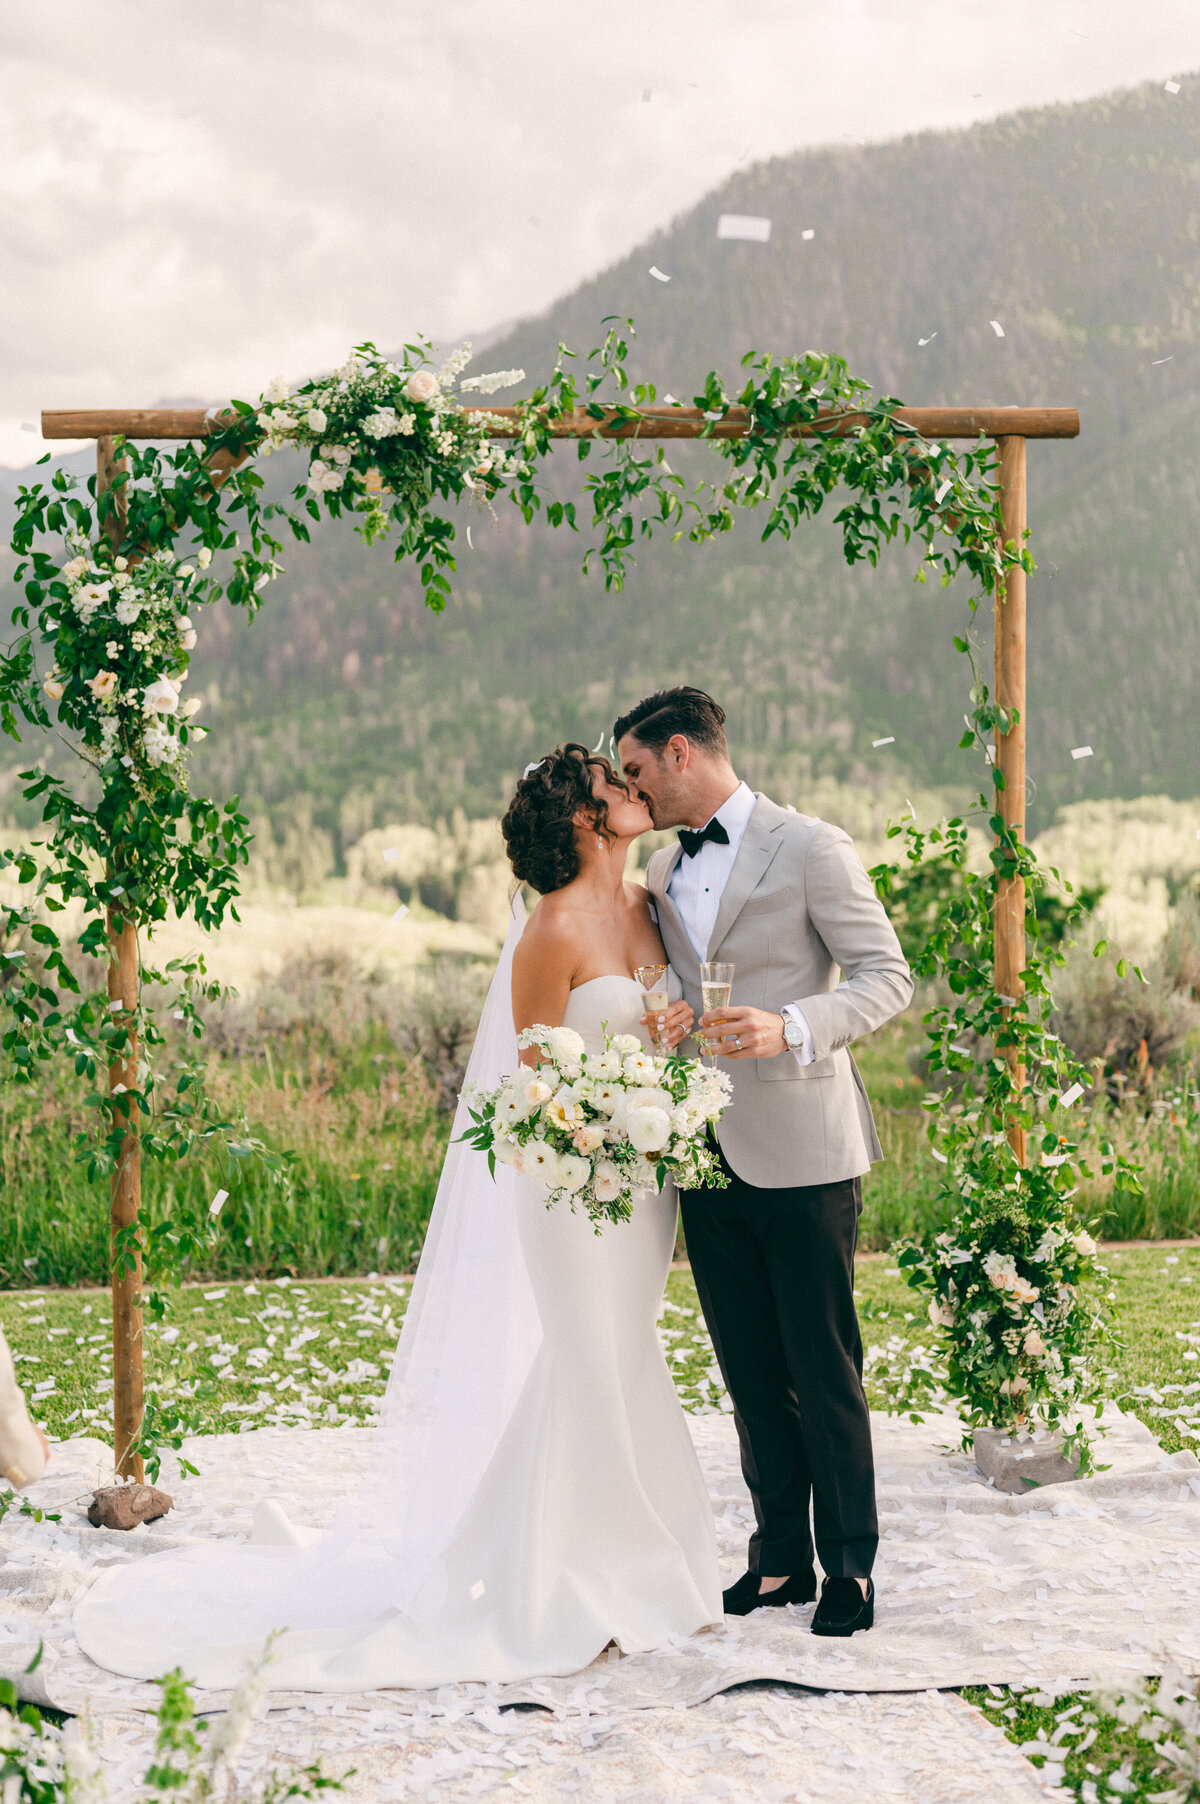 Lia-Ross-Aspen-Snowmass-Patak-Ranch-Wedding-Photography-By-Jacie-Marguerite-440